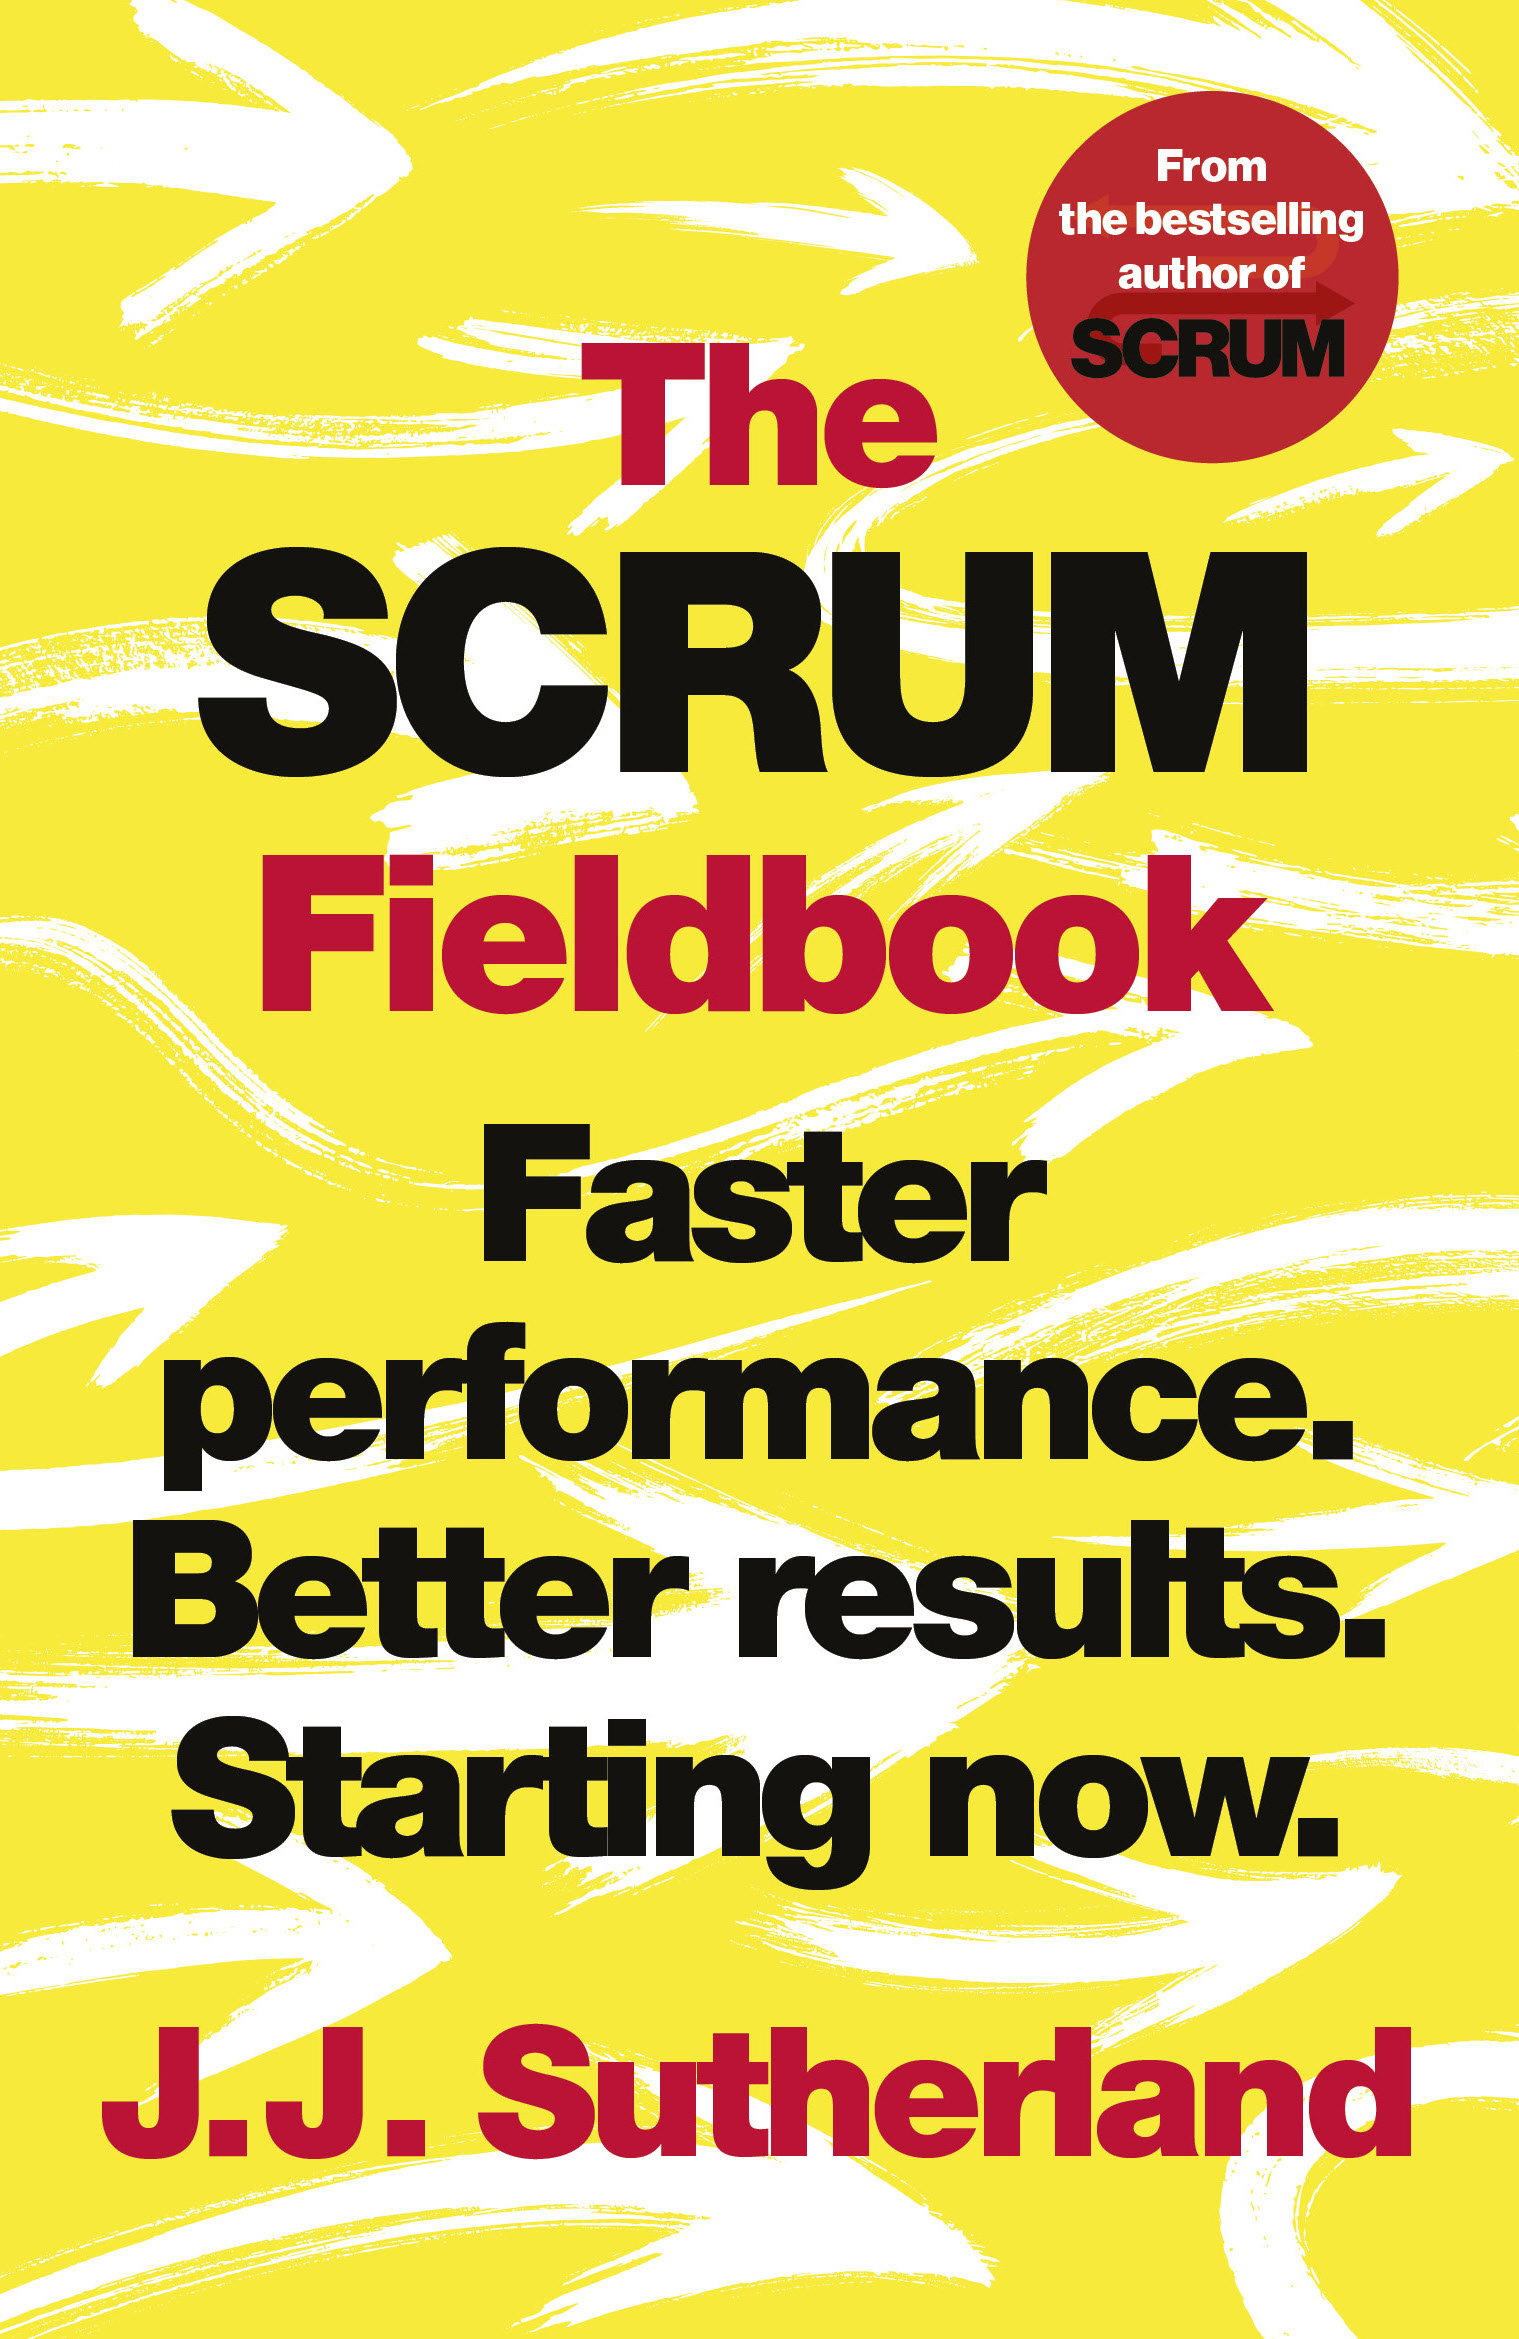 THE SCRUM FIELDBOOK : FASTER PERFORMANCE. BETTER RESULTS. STARTING NOW.